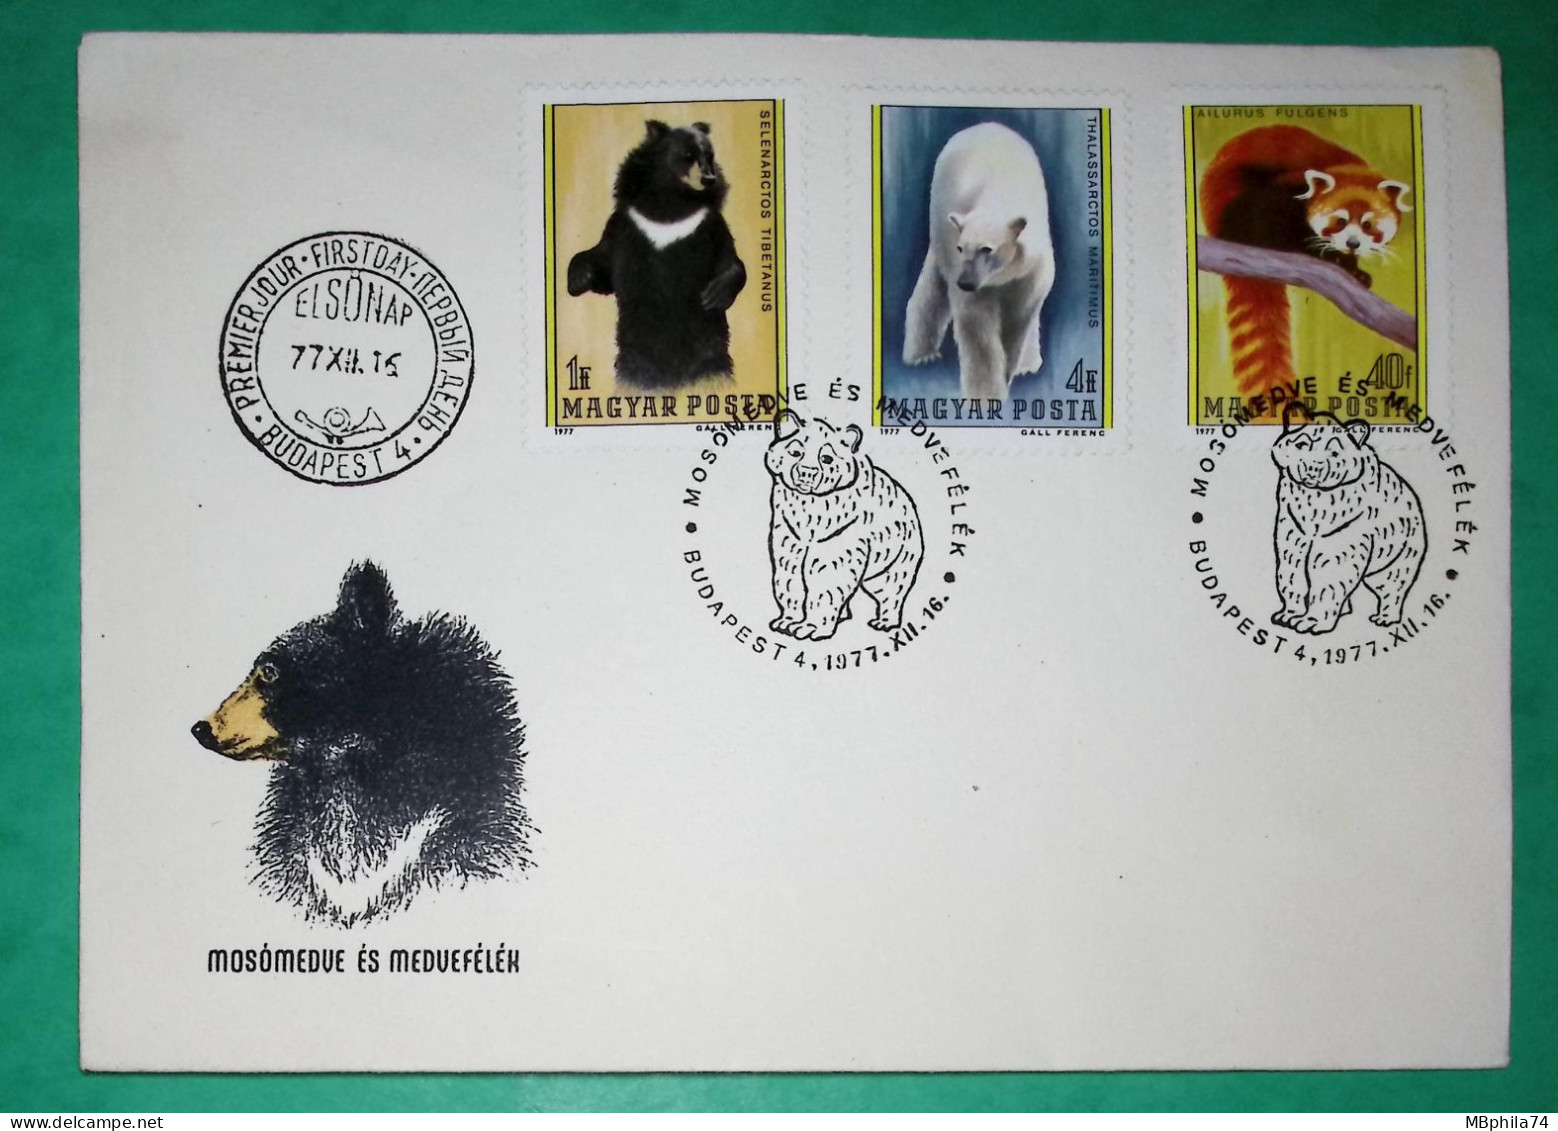 FIRST DAY COVER BUDAPEST MOSOMEDVE ES MEDVEFELEK STAMPS ANIMALS WHITE BLACK BEAR RED PANDA 1977 REGISTERED LETTER - Covers & Documents